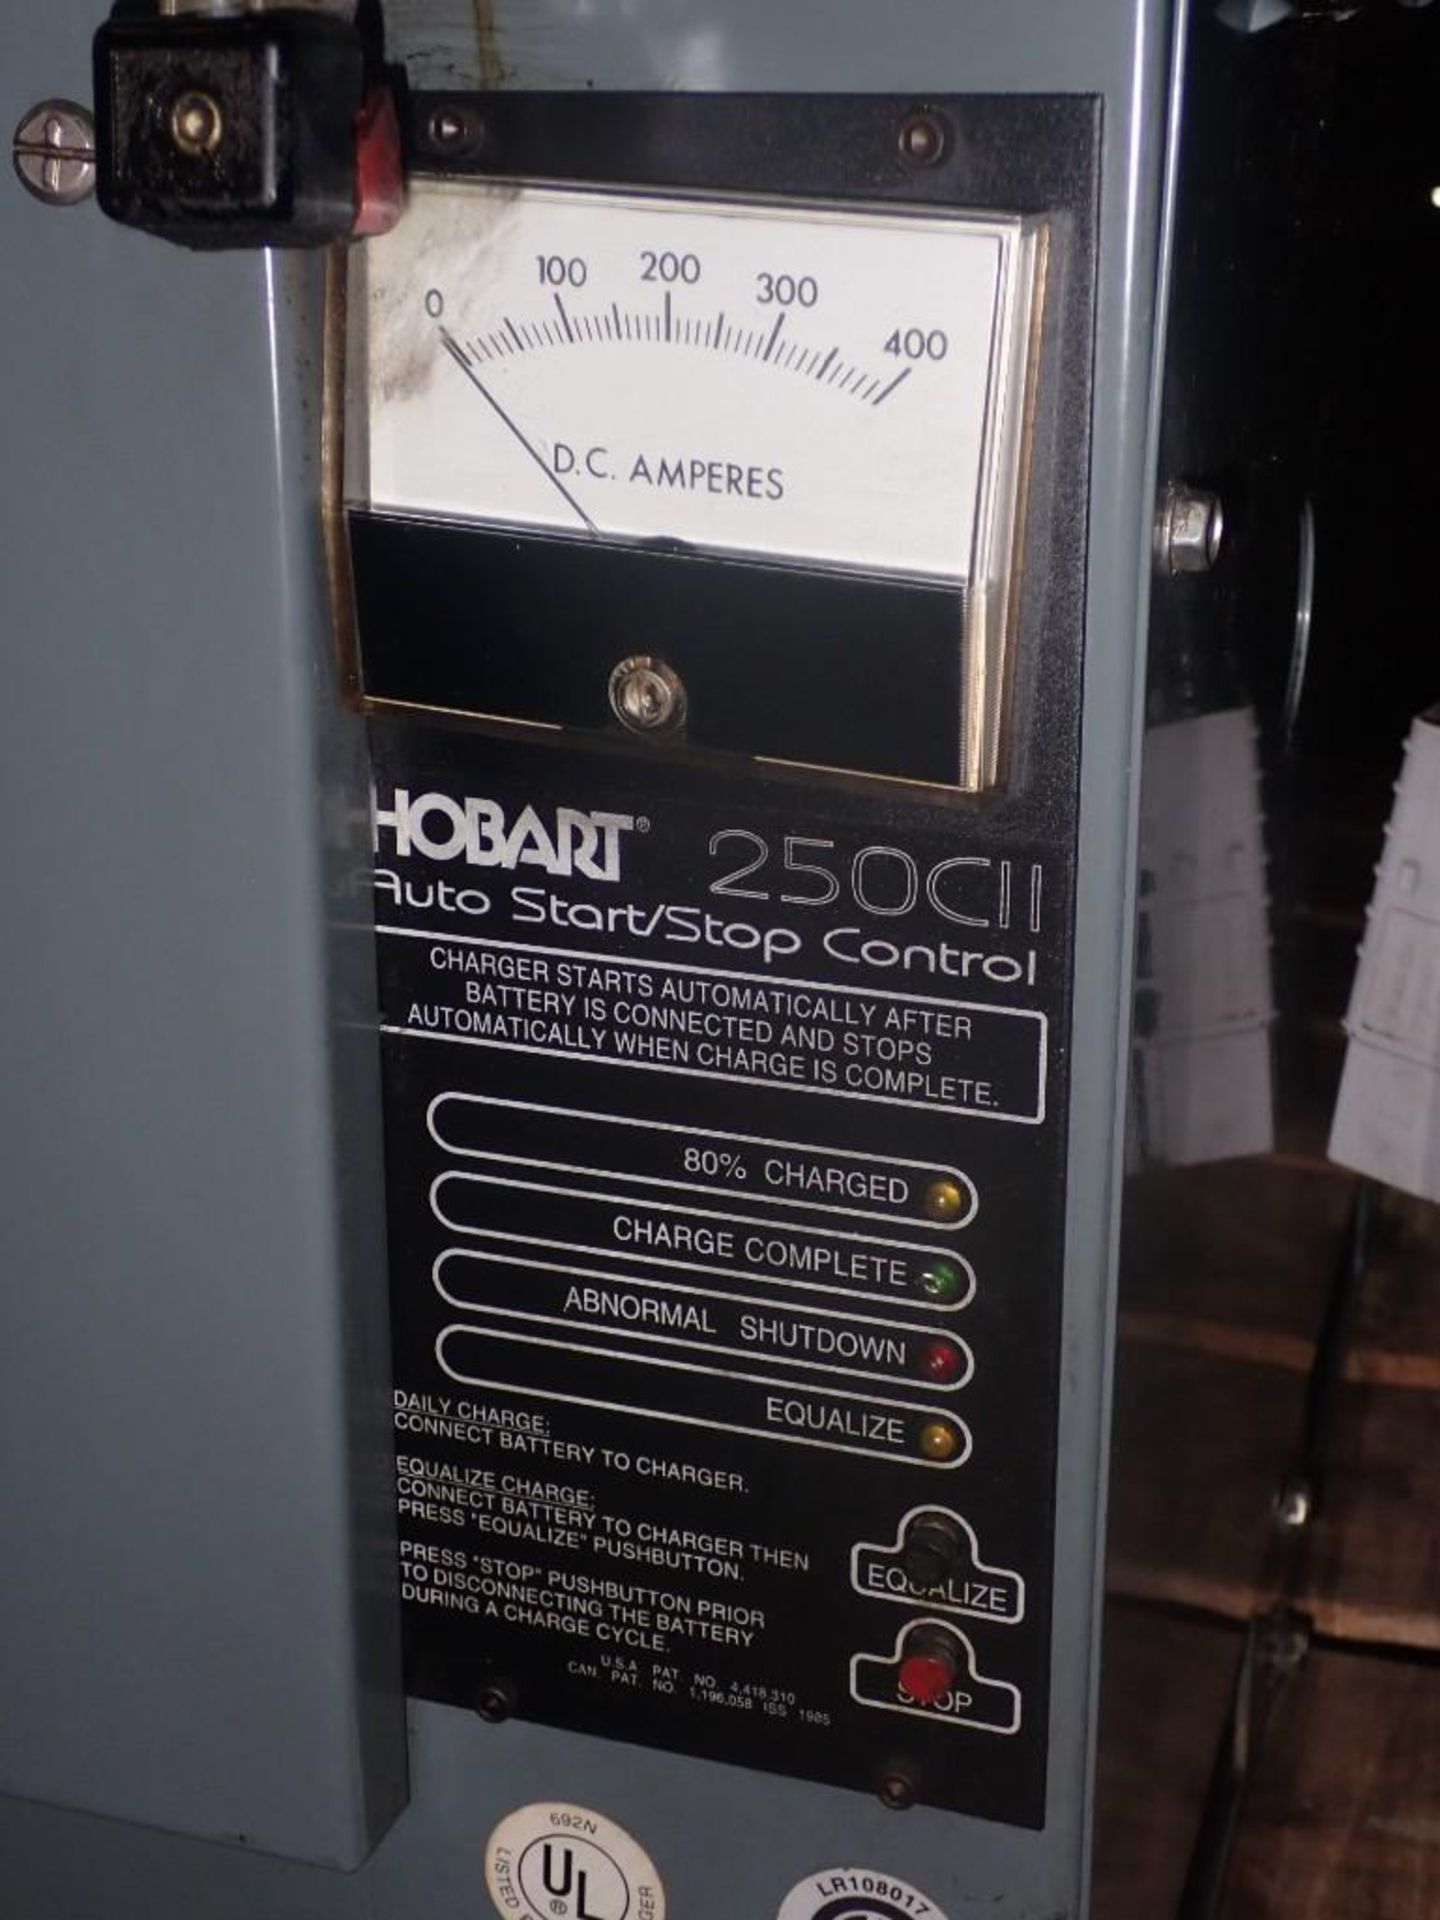 24 Volt Hobart Accu Charger #250CII Battery Charger - Image 4 of 5